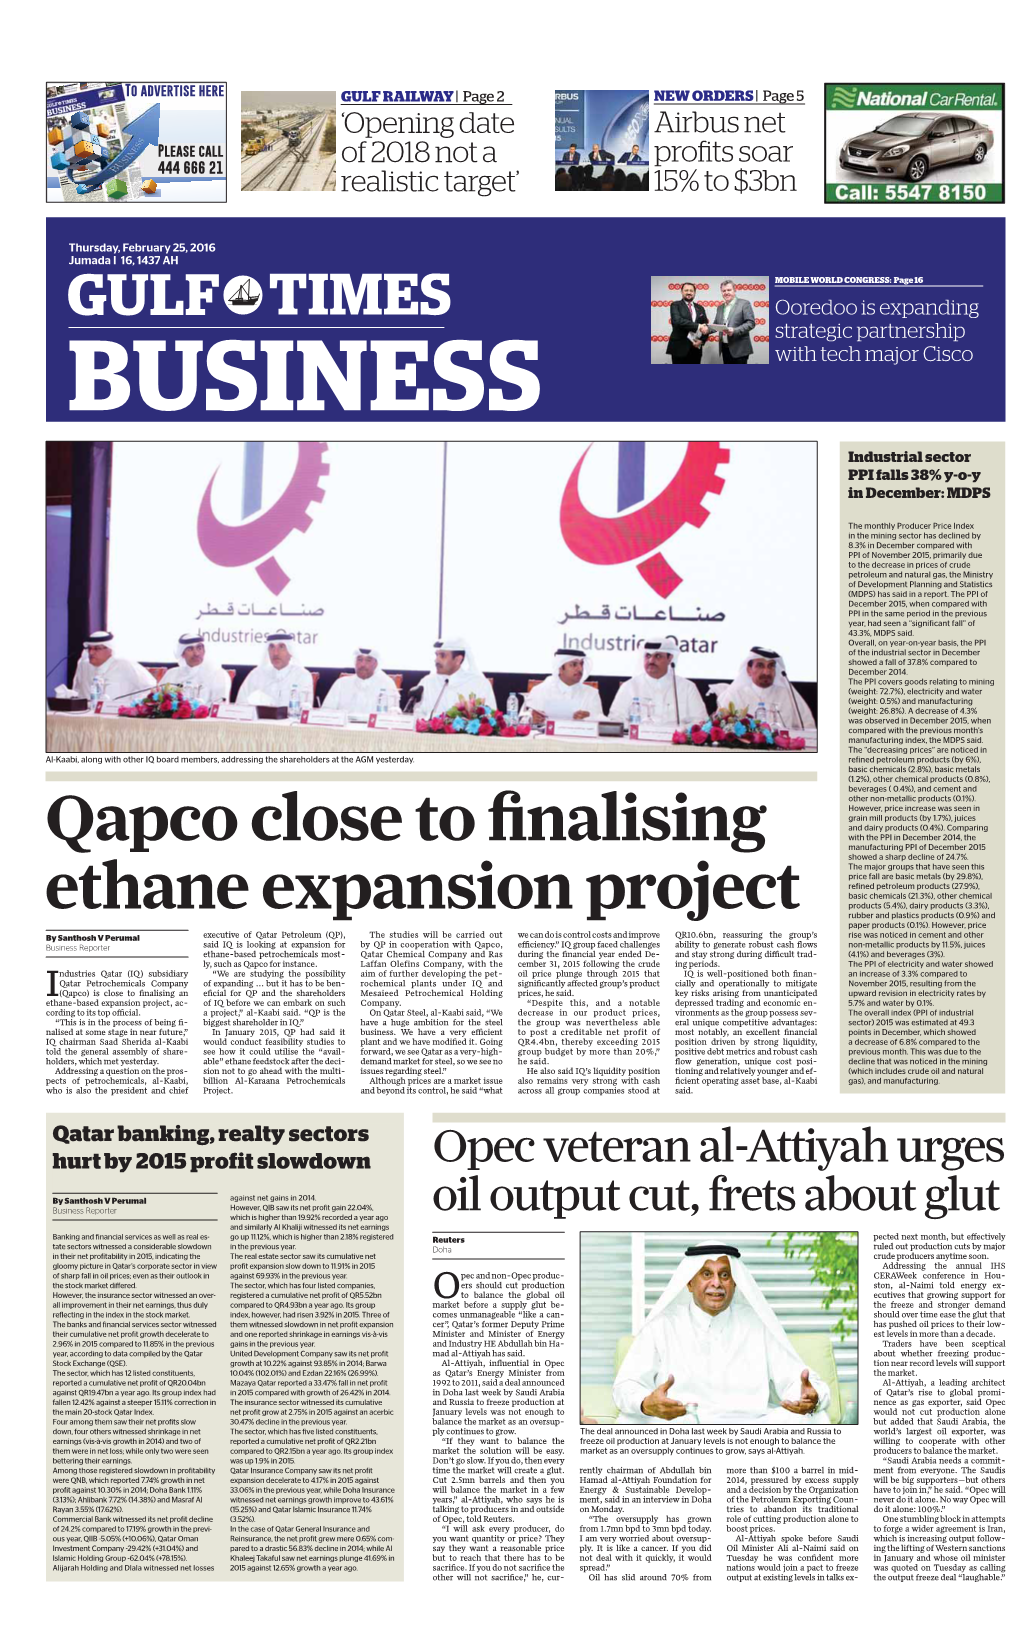 Qapco Close to Finalising Ethane Expansion Project